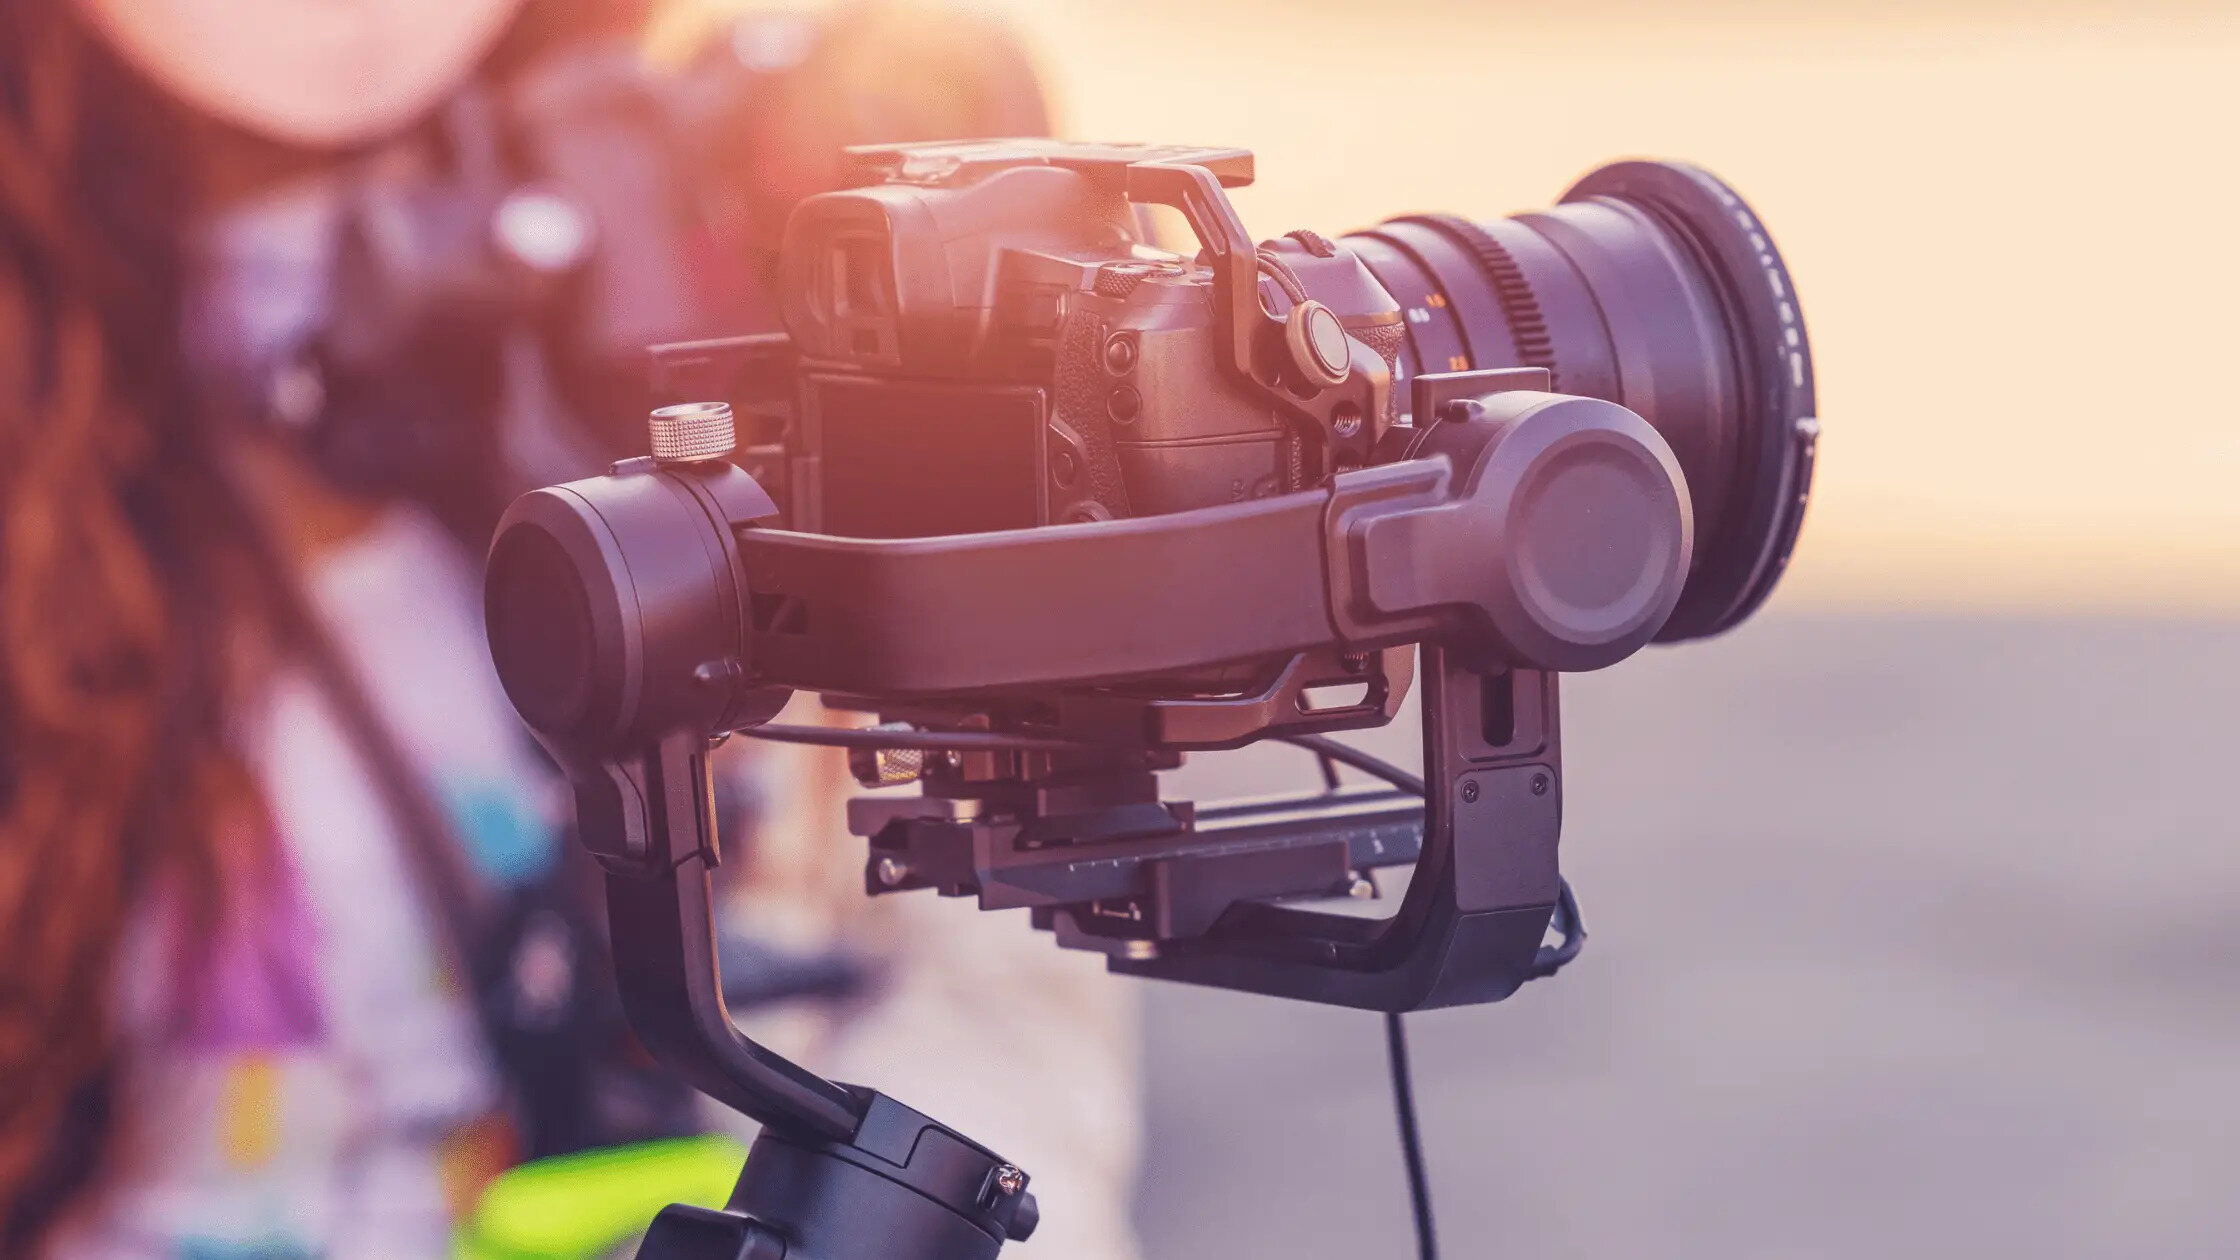 Troubleshooting Guide: Addressing Shaking Issues With Your Gimbal